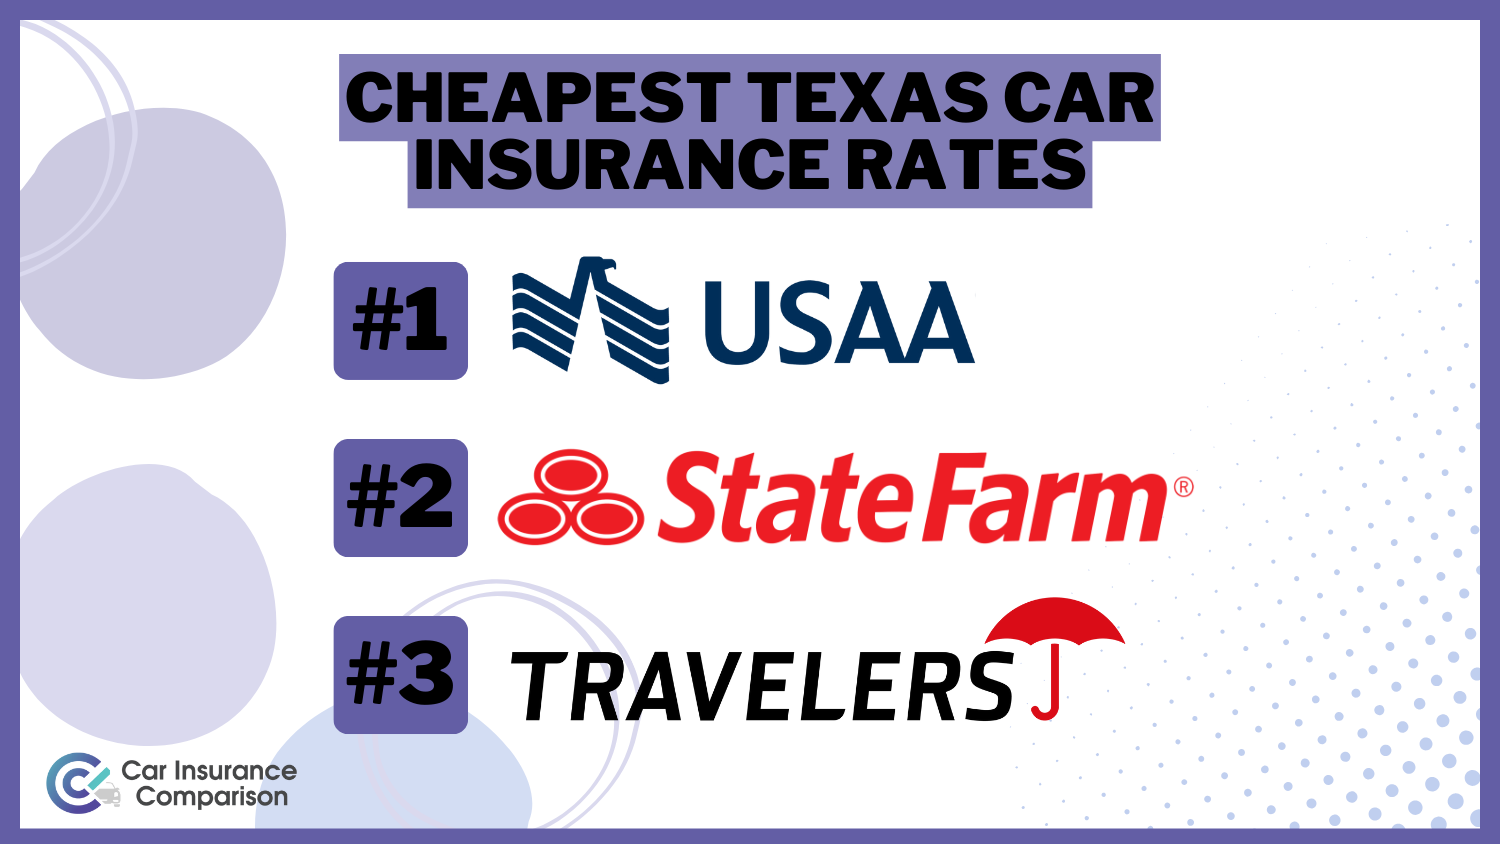 Cheapest Texas Car Insurance Rates: USAA, State Farm, Travelers